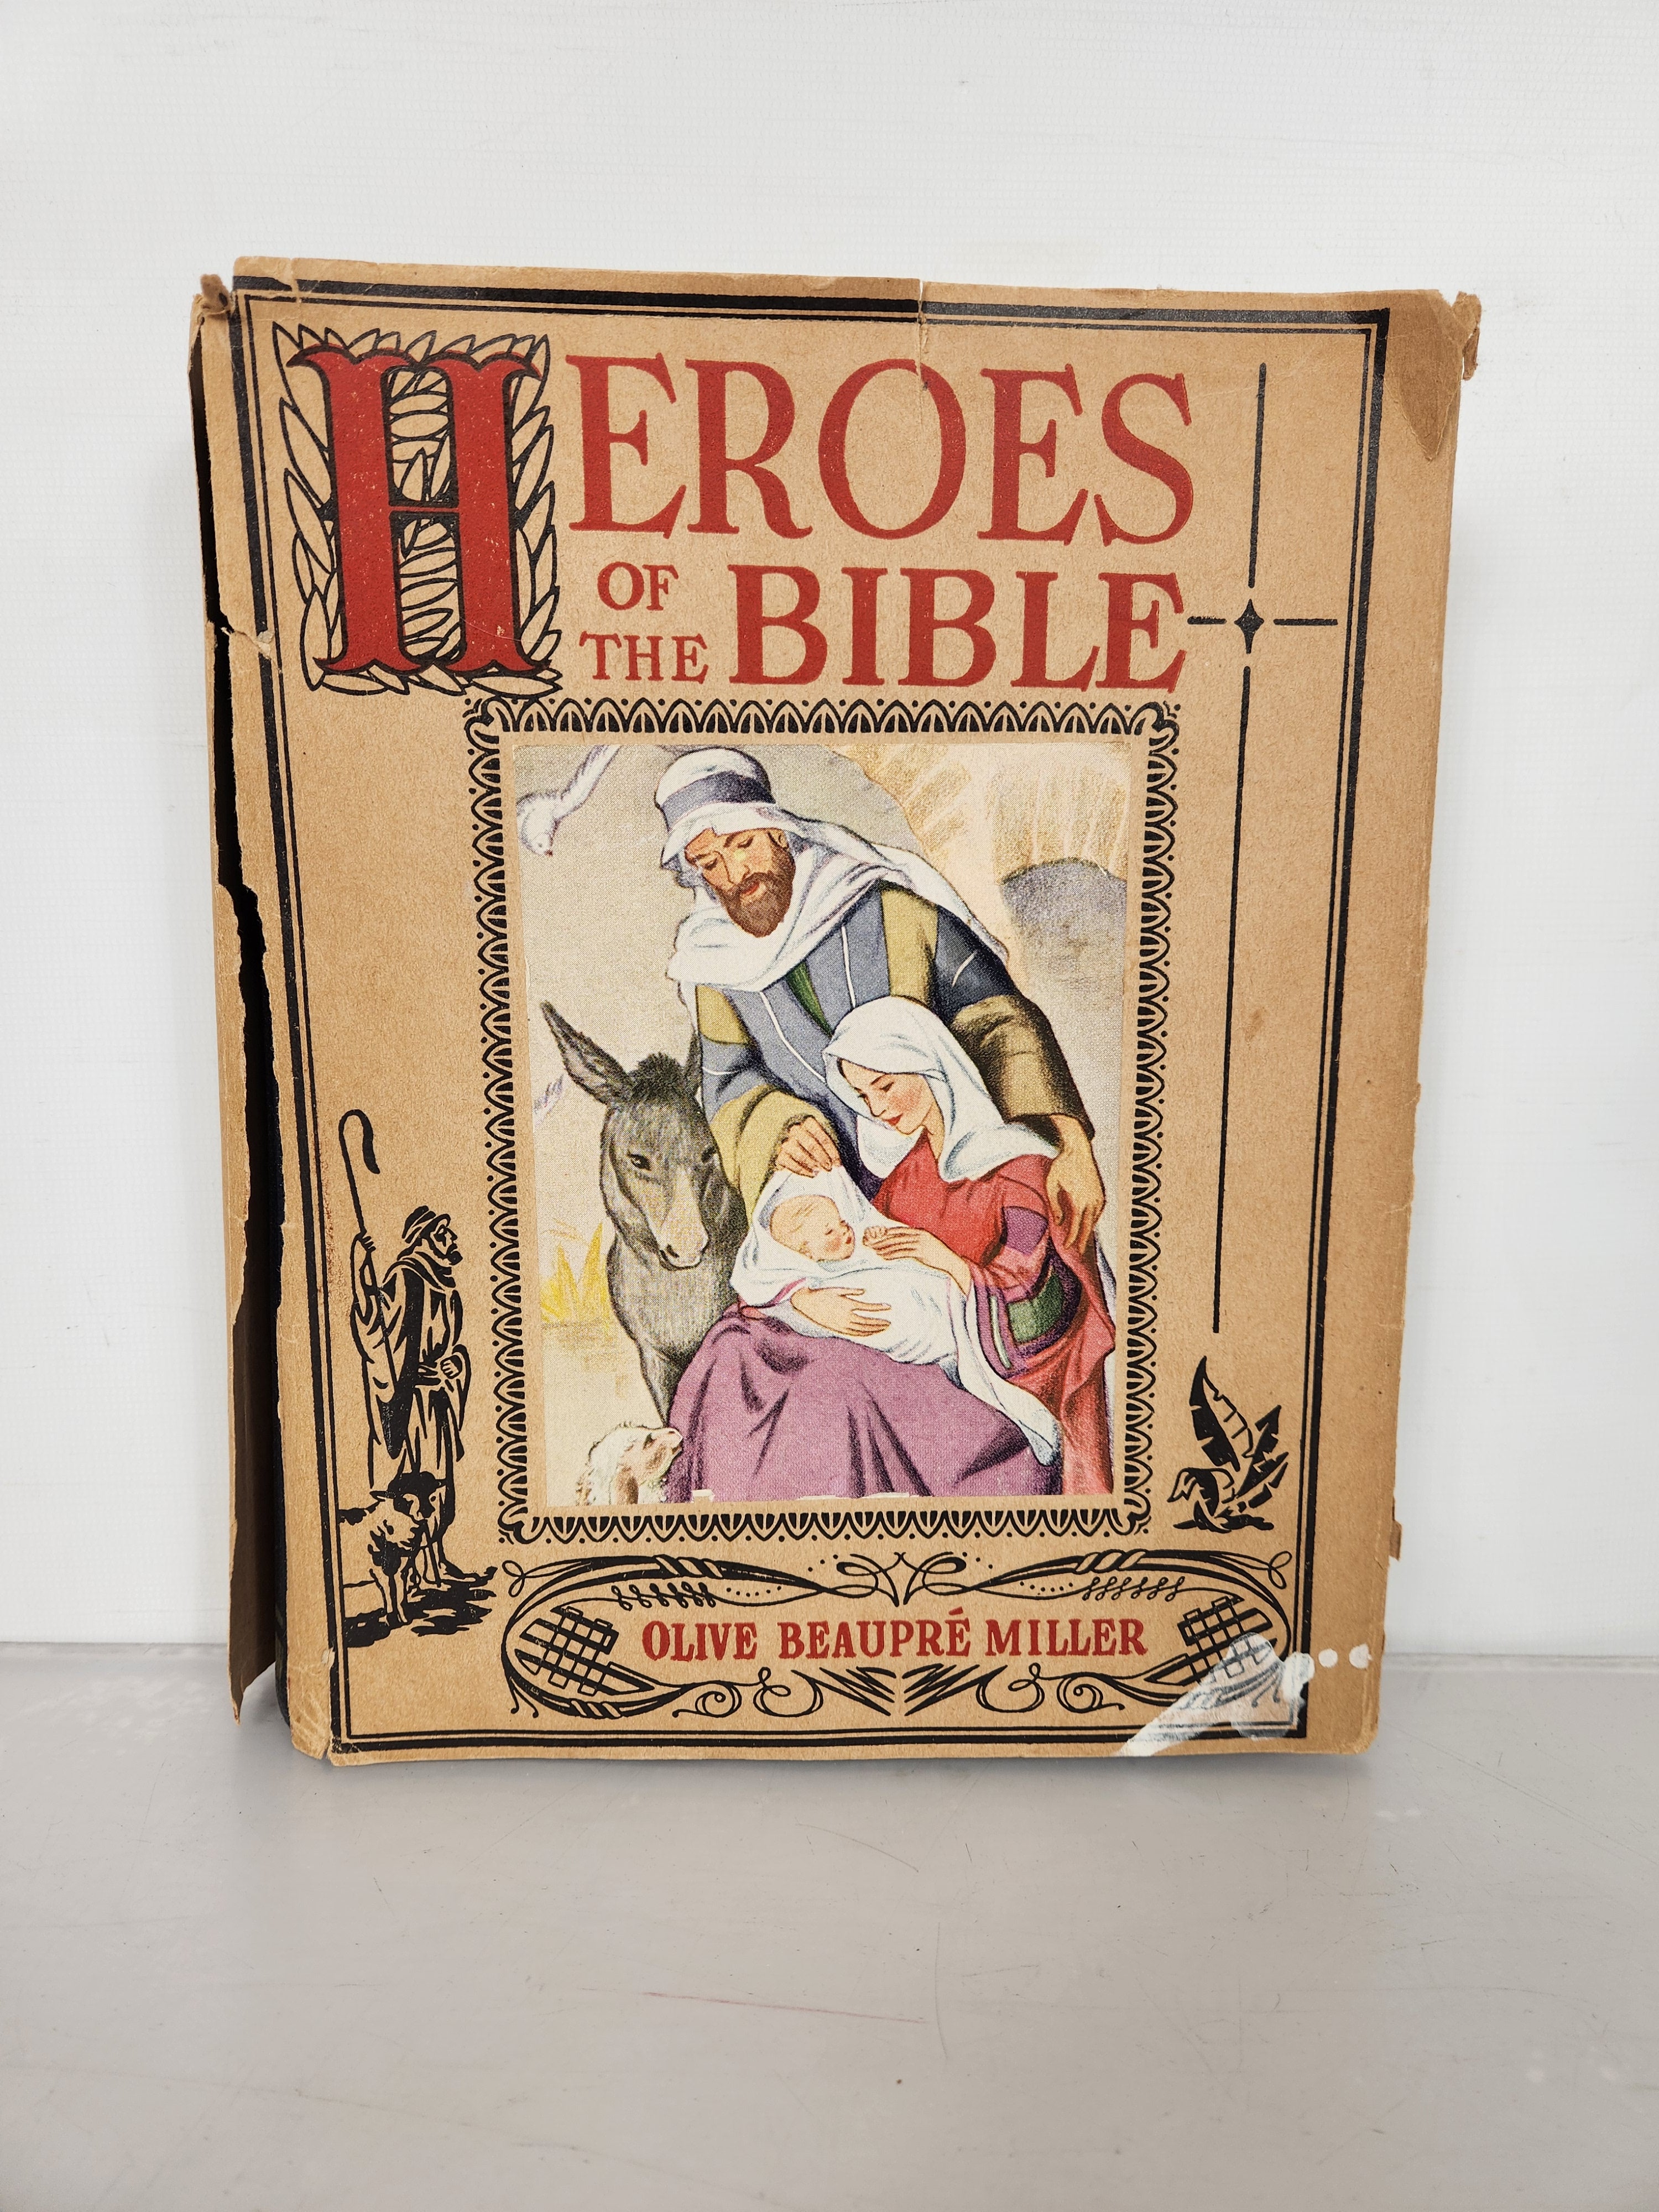 Heroes of the Bible by Olive Beaupre Miller 1940